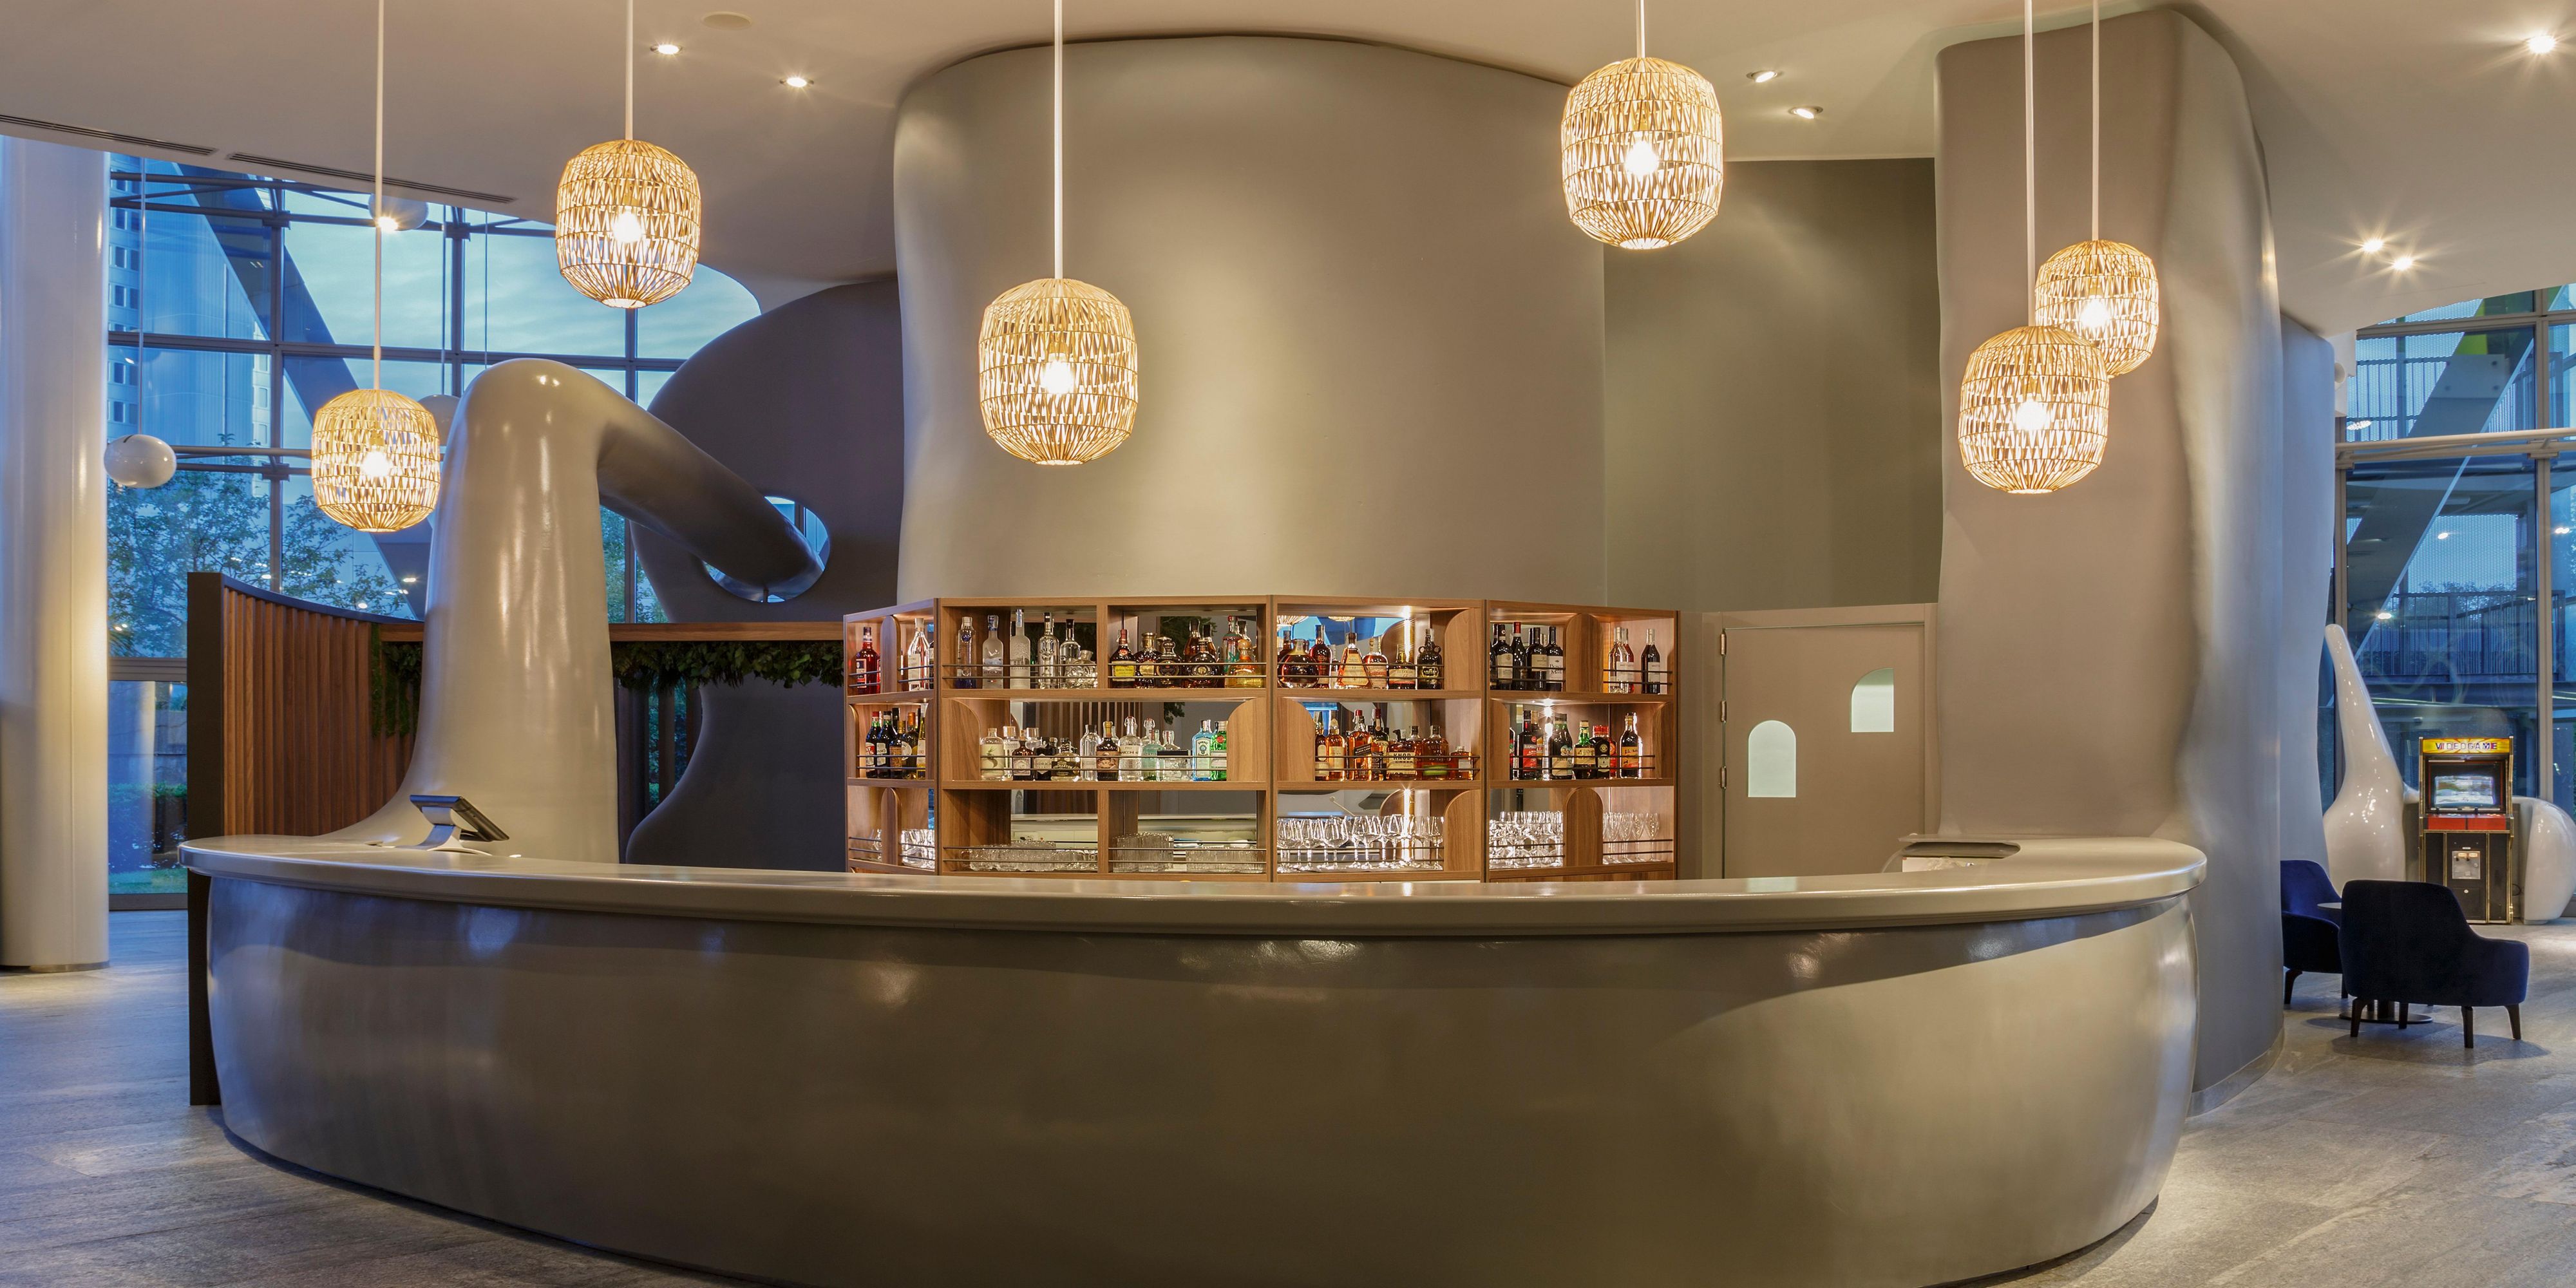 After a day spent on meetings or sightseeing, loosen up and enjoy a well-deserved break with a drink at our bar and a challenge in our gaming area. Pick your drink from our list of skillfully selected wines and spirits or let our expert bartenders take care of your favourite cocktail!